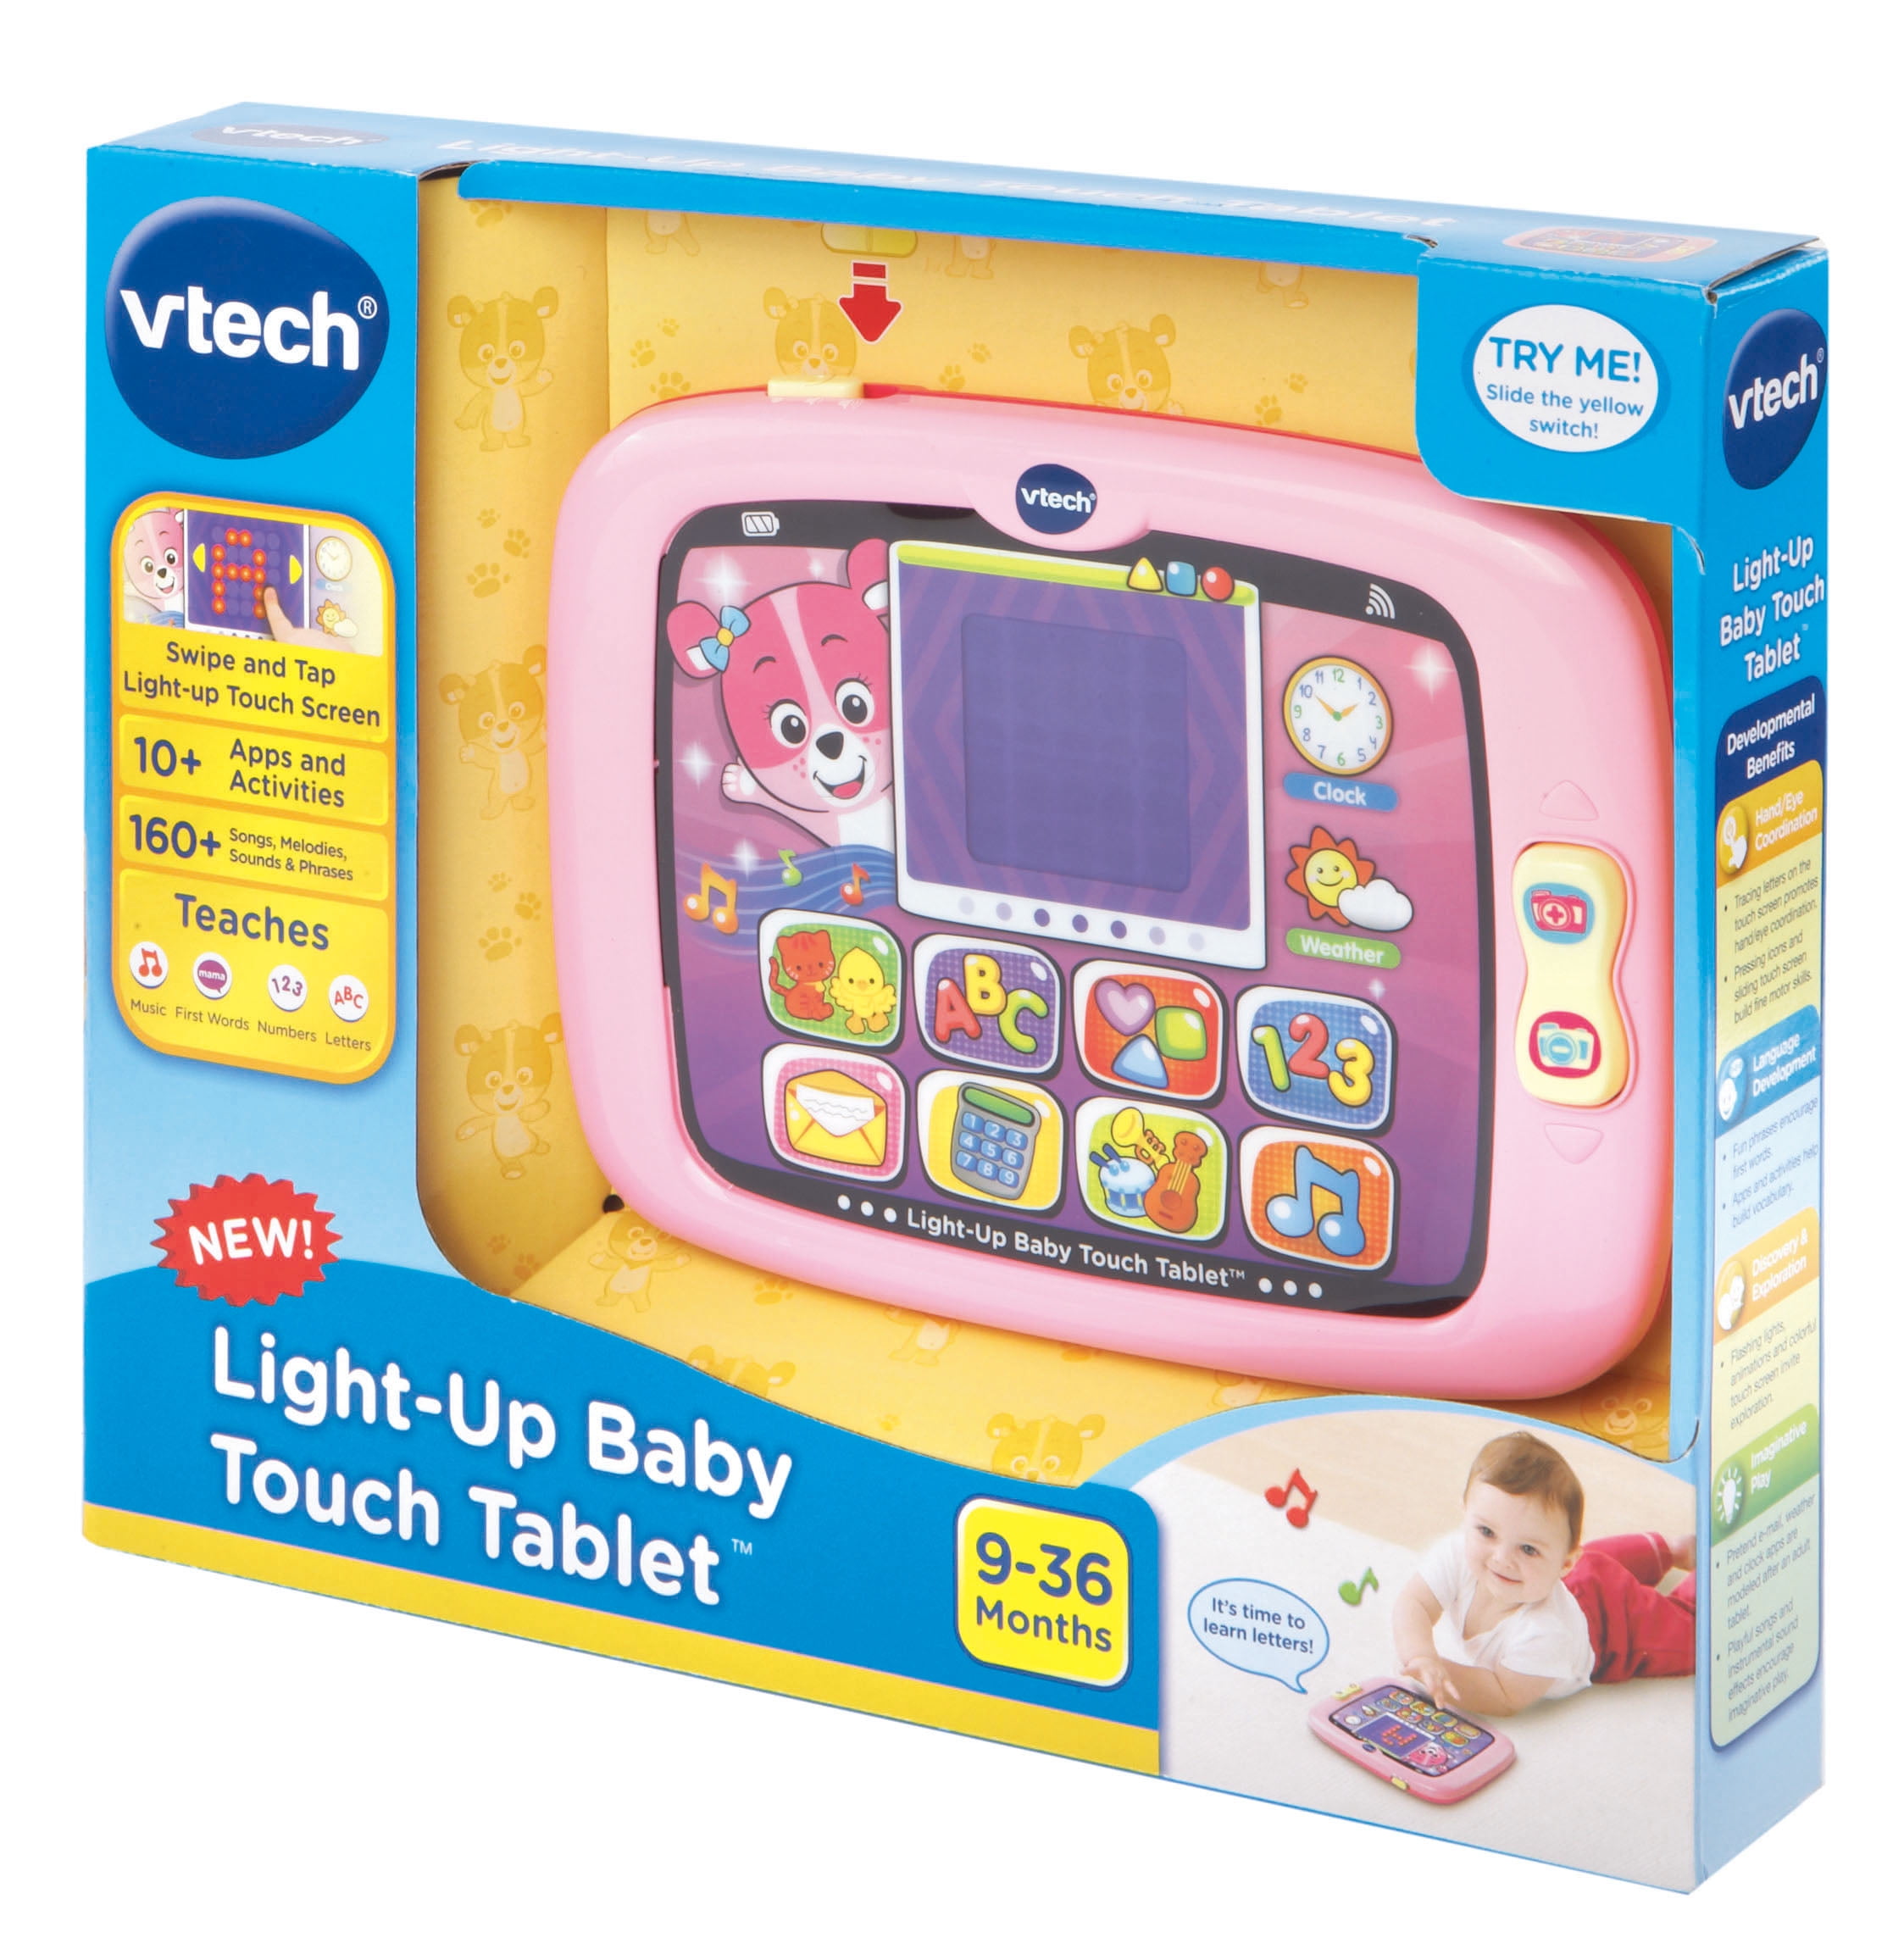 VTech Light up Baby Touch Tablet Pink Ii3 for sale online 